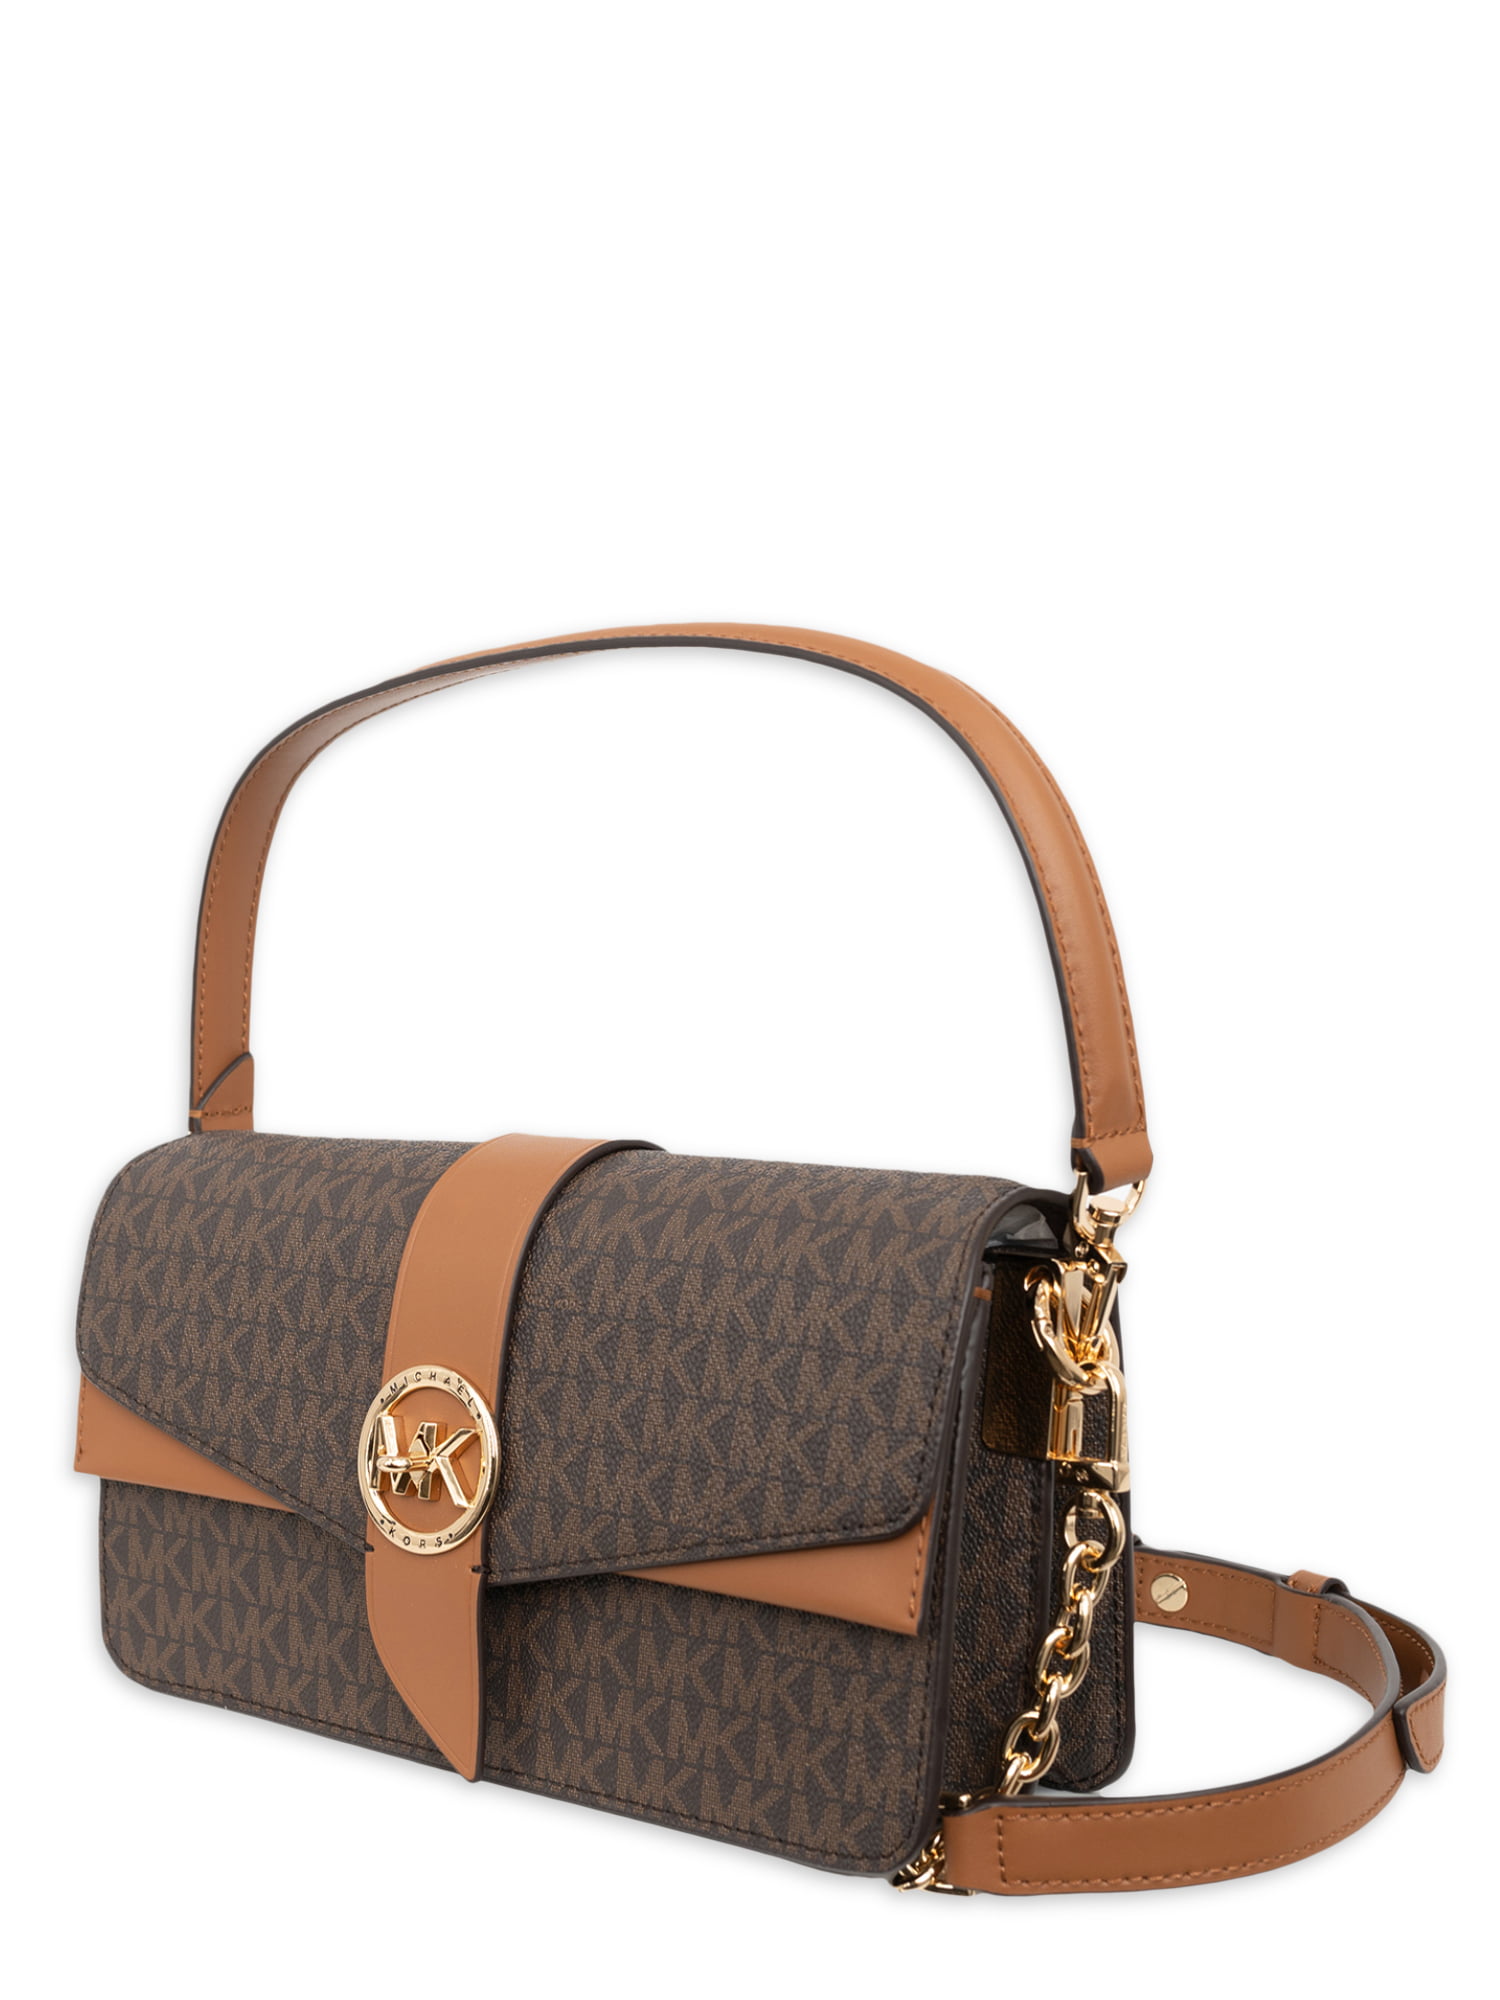 Michael Kors Greenwich Extra-small Saffiano Leather Sling